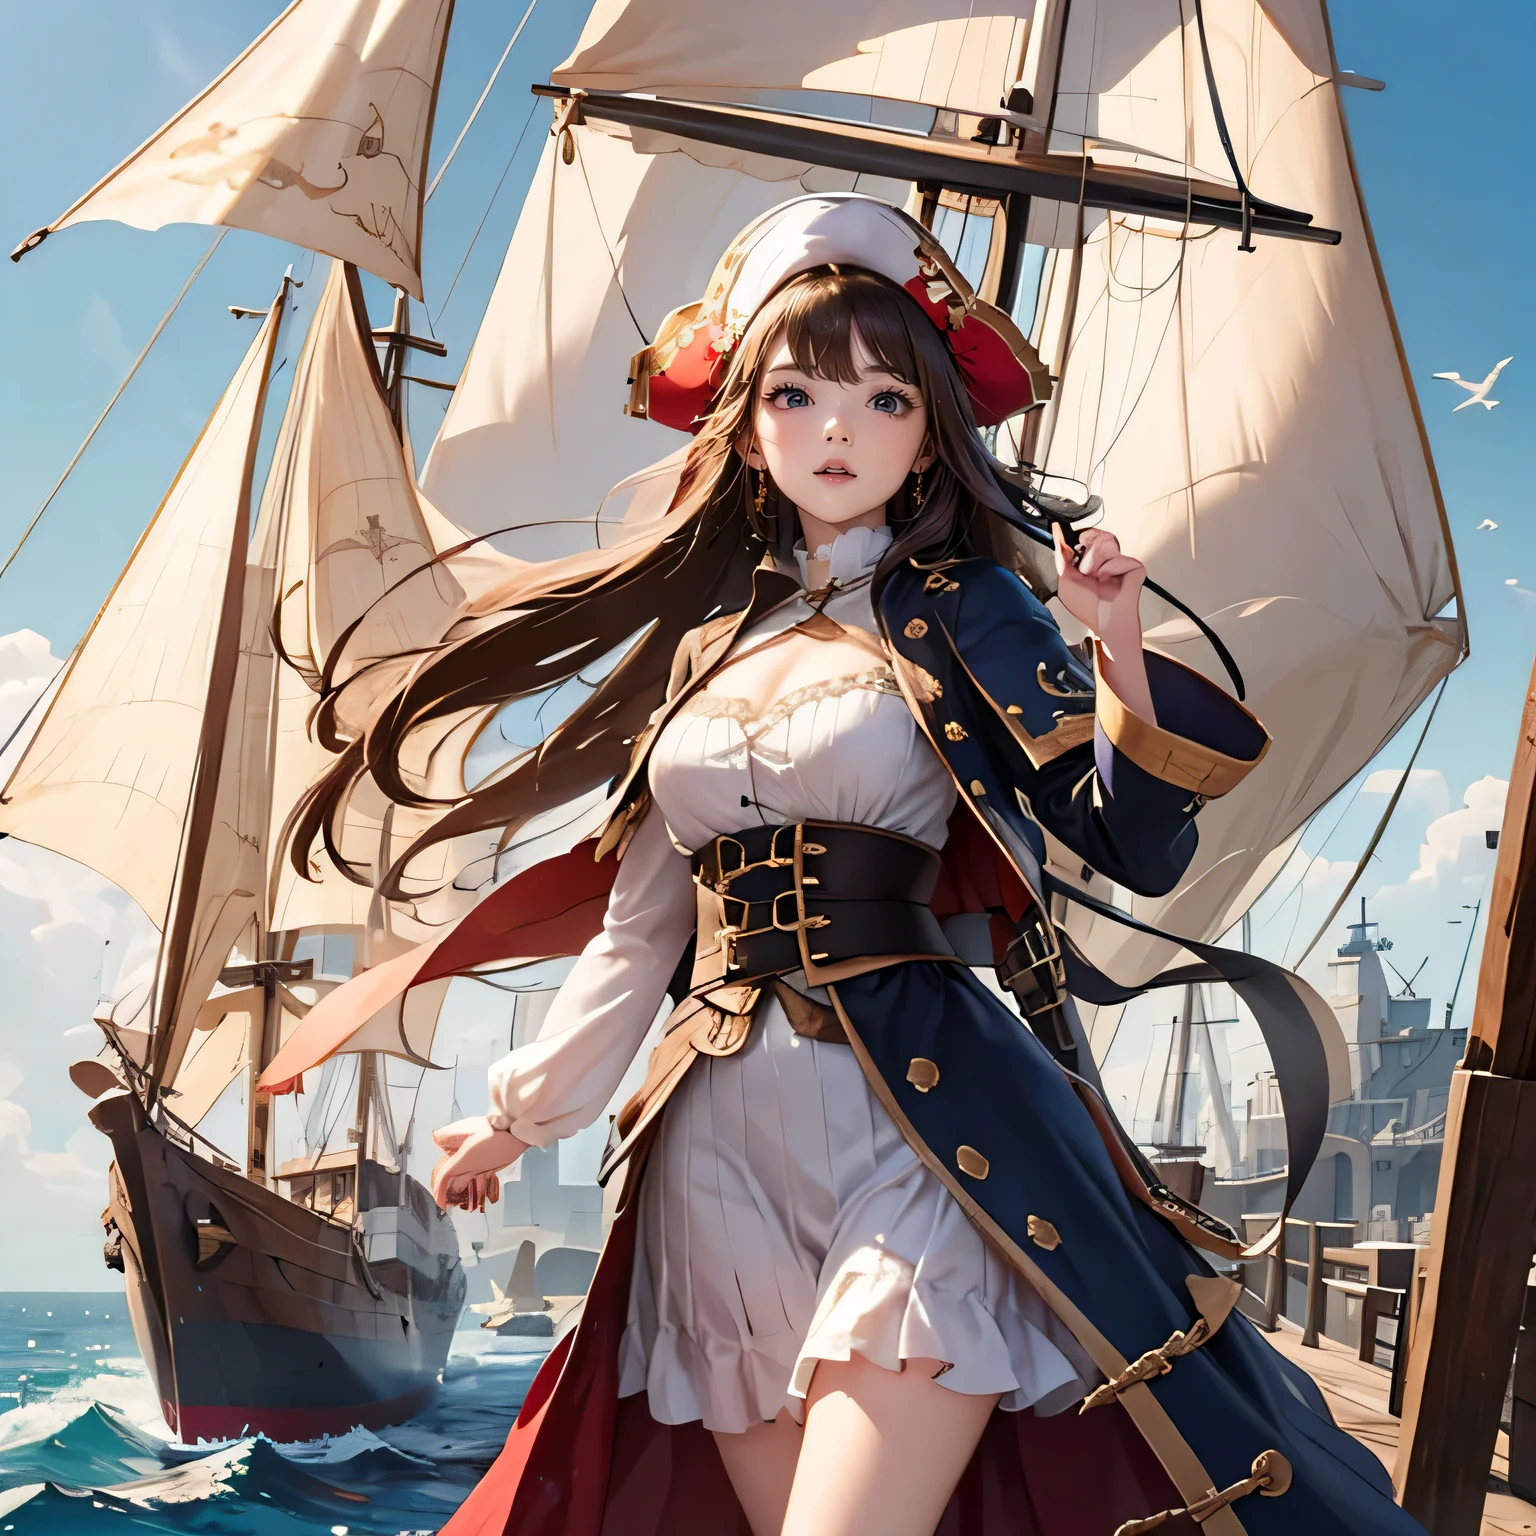 ((medieval world)), (noble's daughter who became a pirate, medieval European aristocratic dress), on the deck of a medieval large galleon that was made of woods during the Age of Discovery in the Middle Ages, windy, few sailors, a lot of cargo,